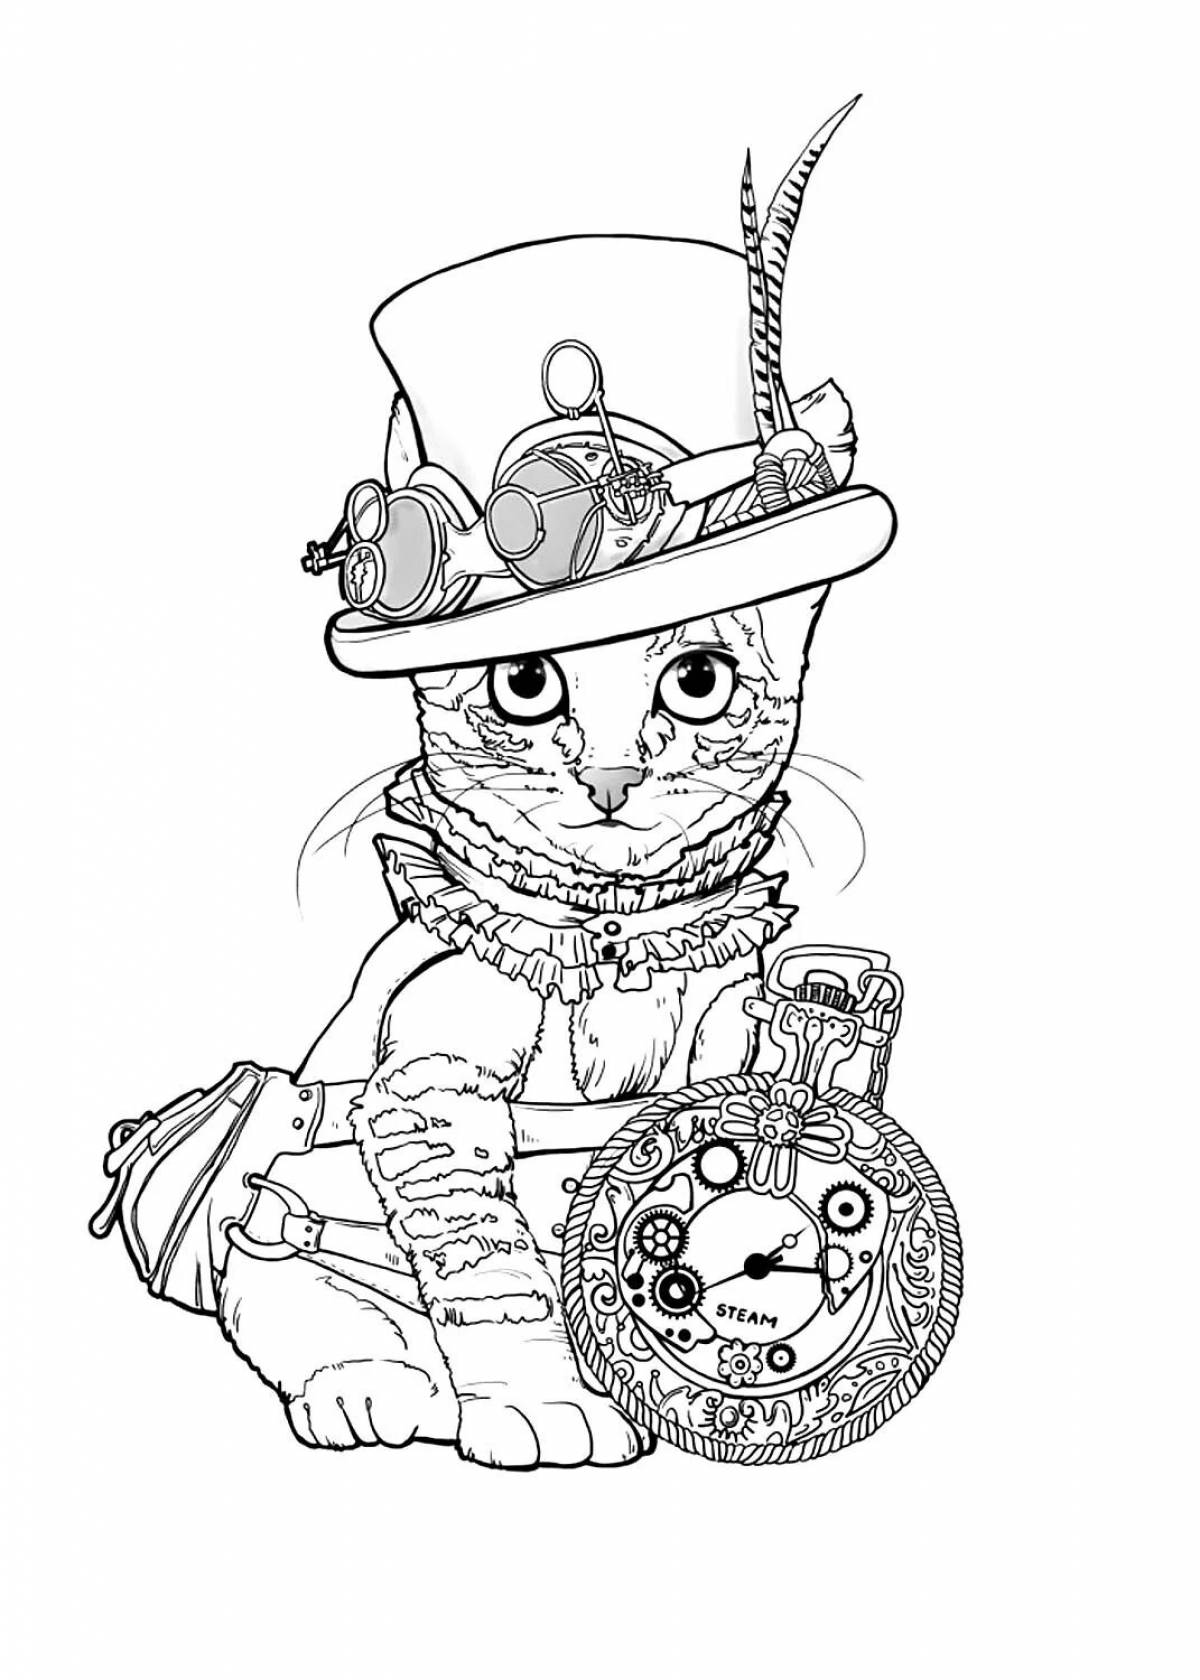 Steampunk trendy coloring book